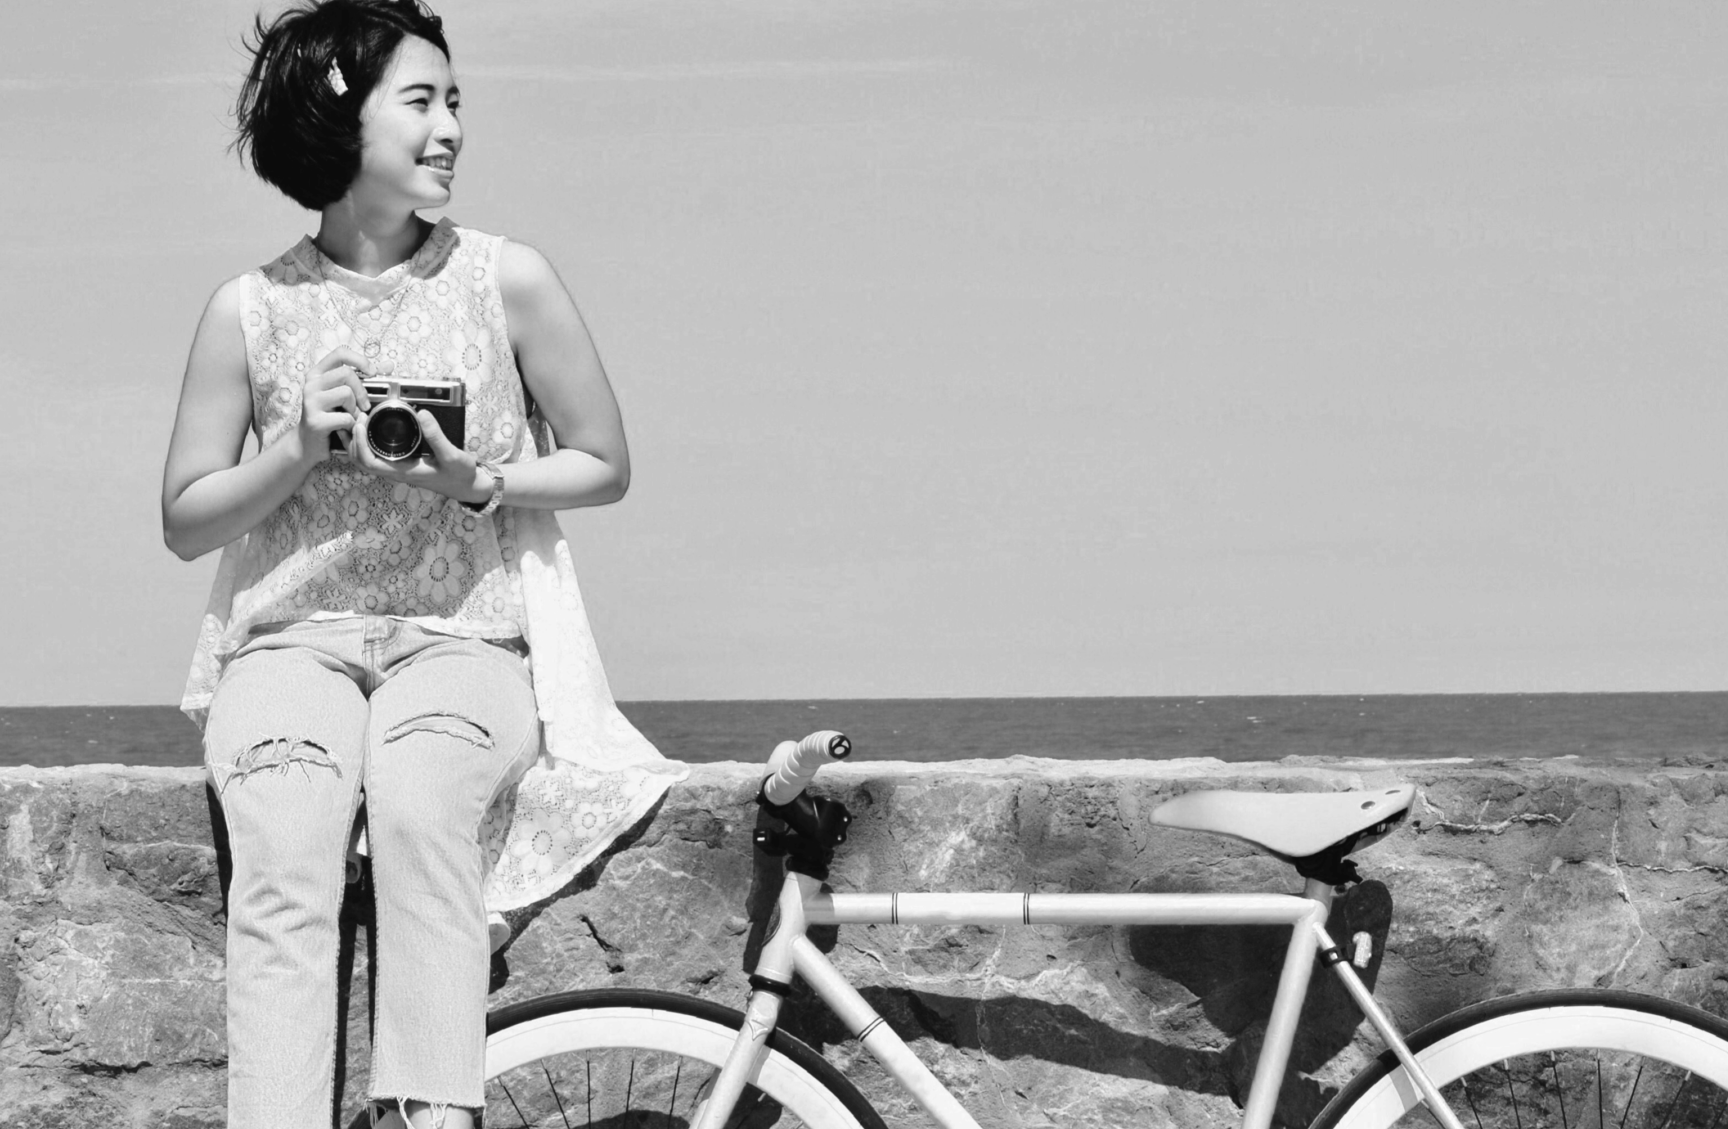 Young Asian woman sitting on stone fence with camera and a bike